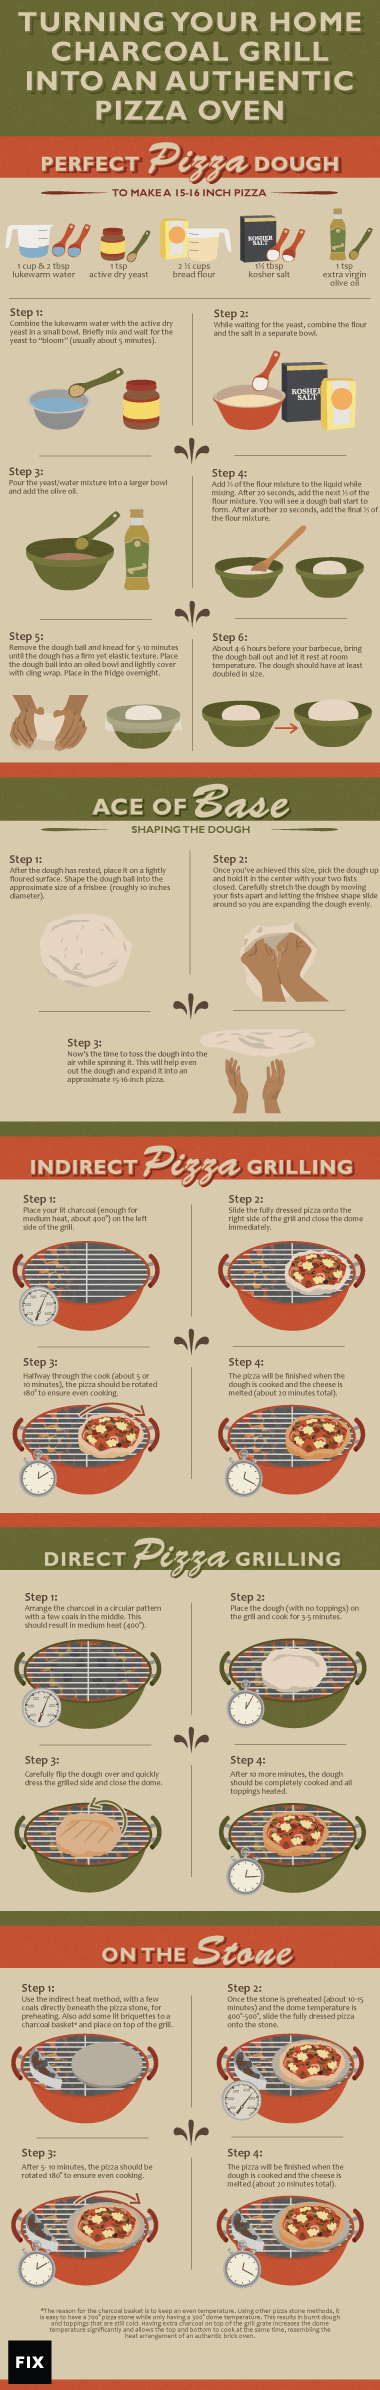 pizza-grilling-embed-small